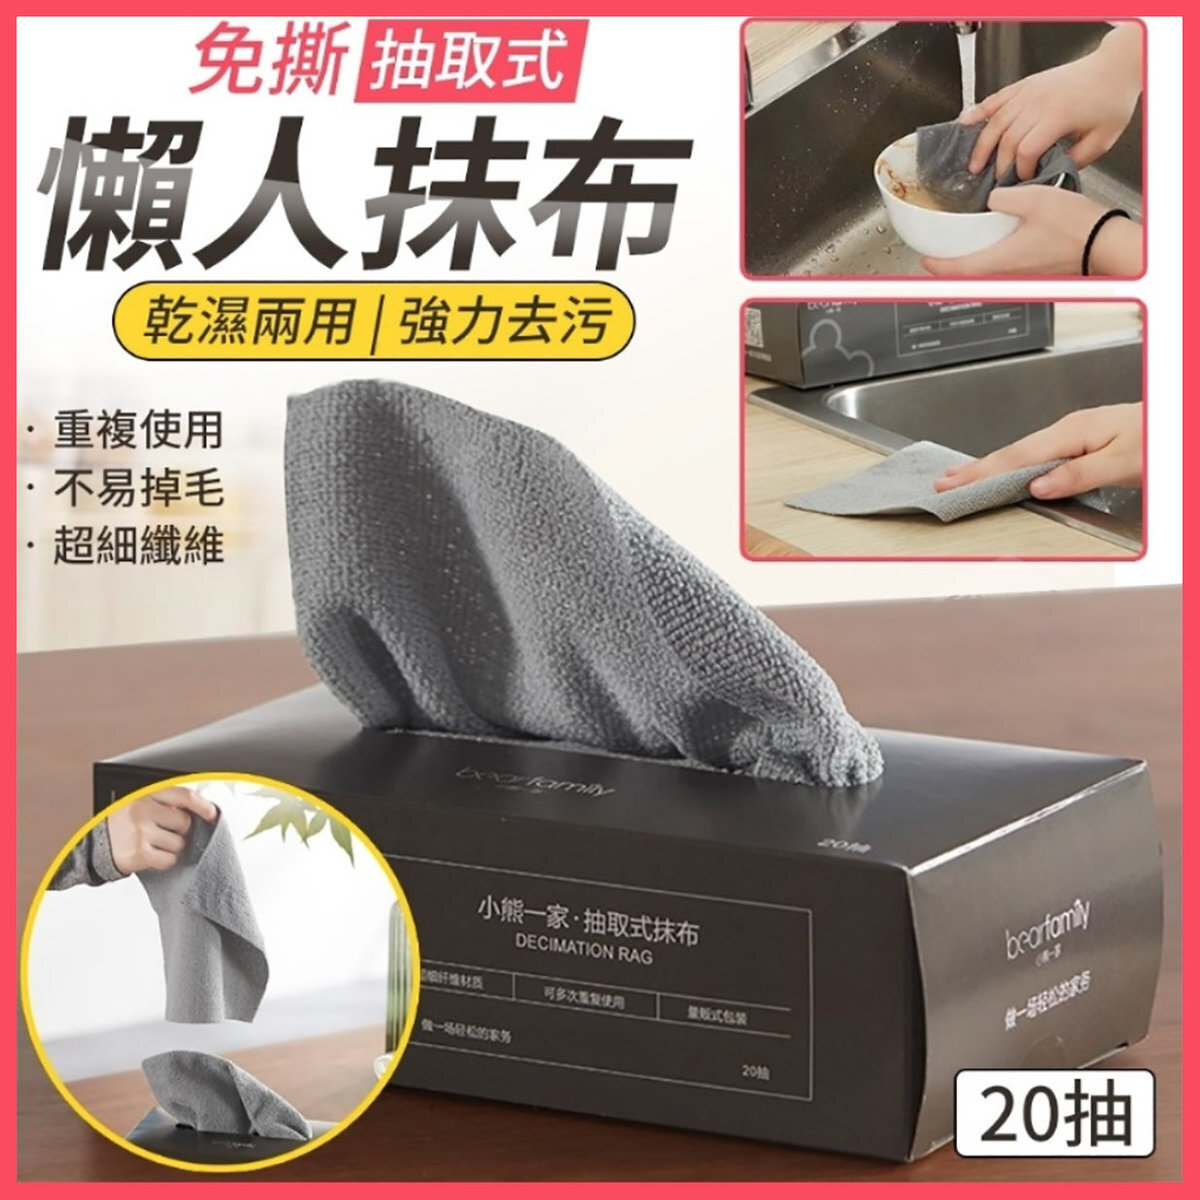 Multipurpose Box Disposable Cleaning Cloths -Grey